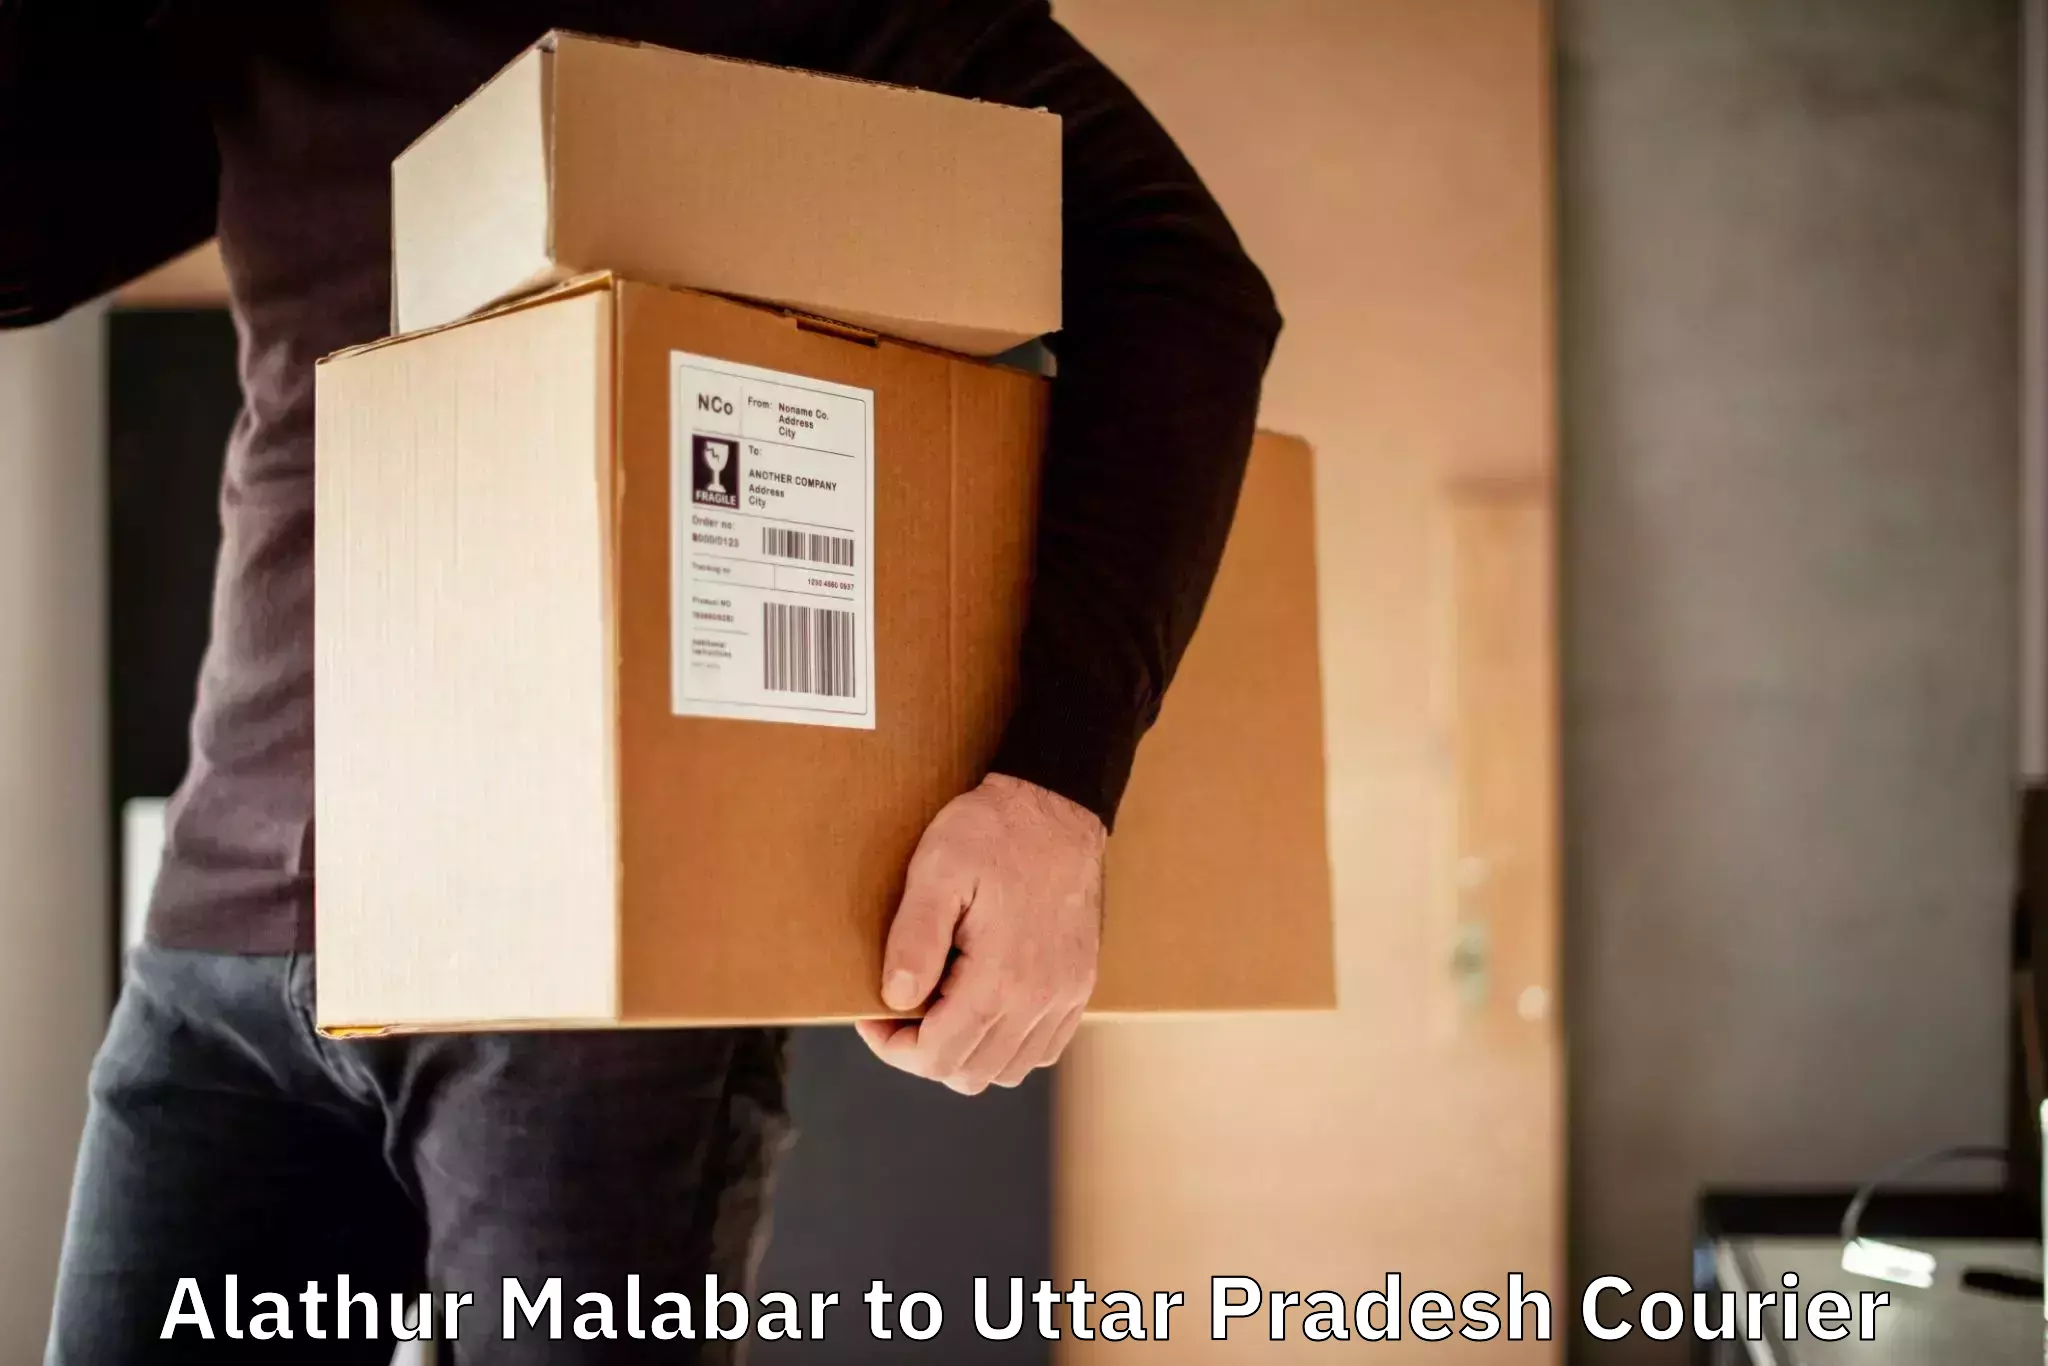 Express delivery capabilities Alathur Malabar to Fatehpur